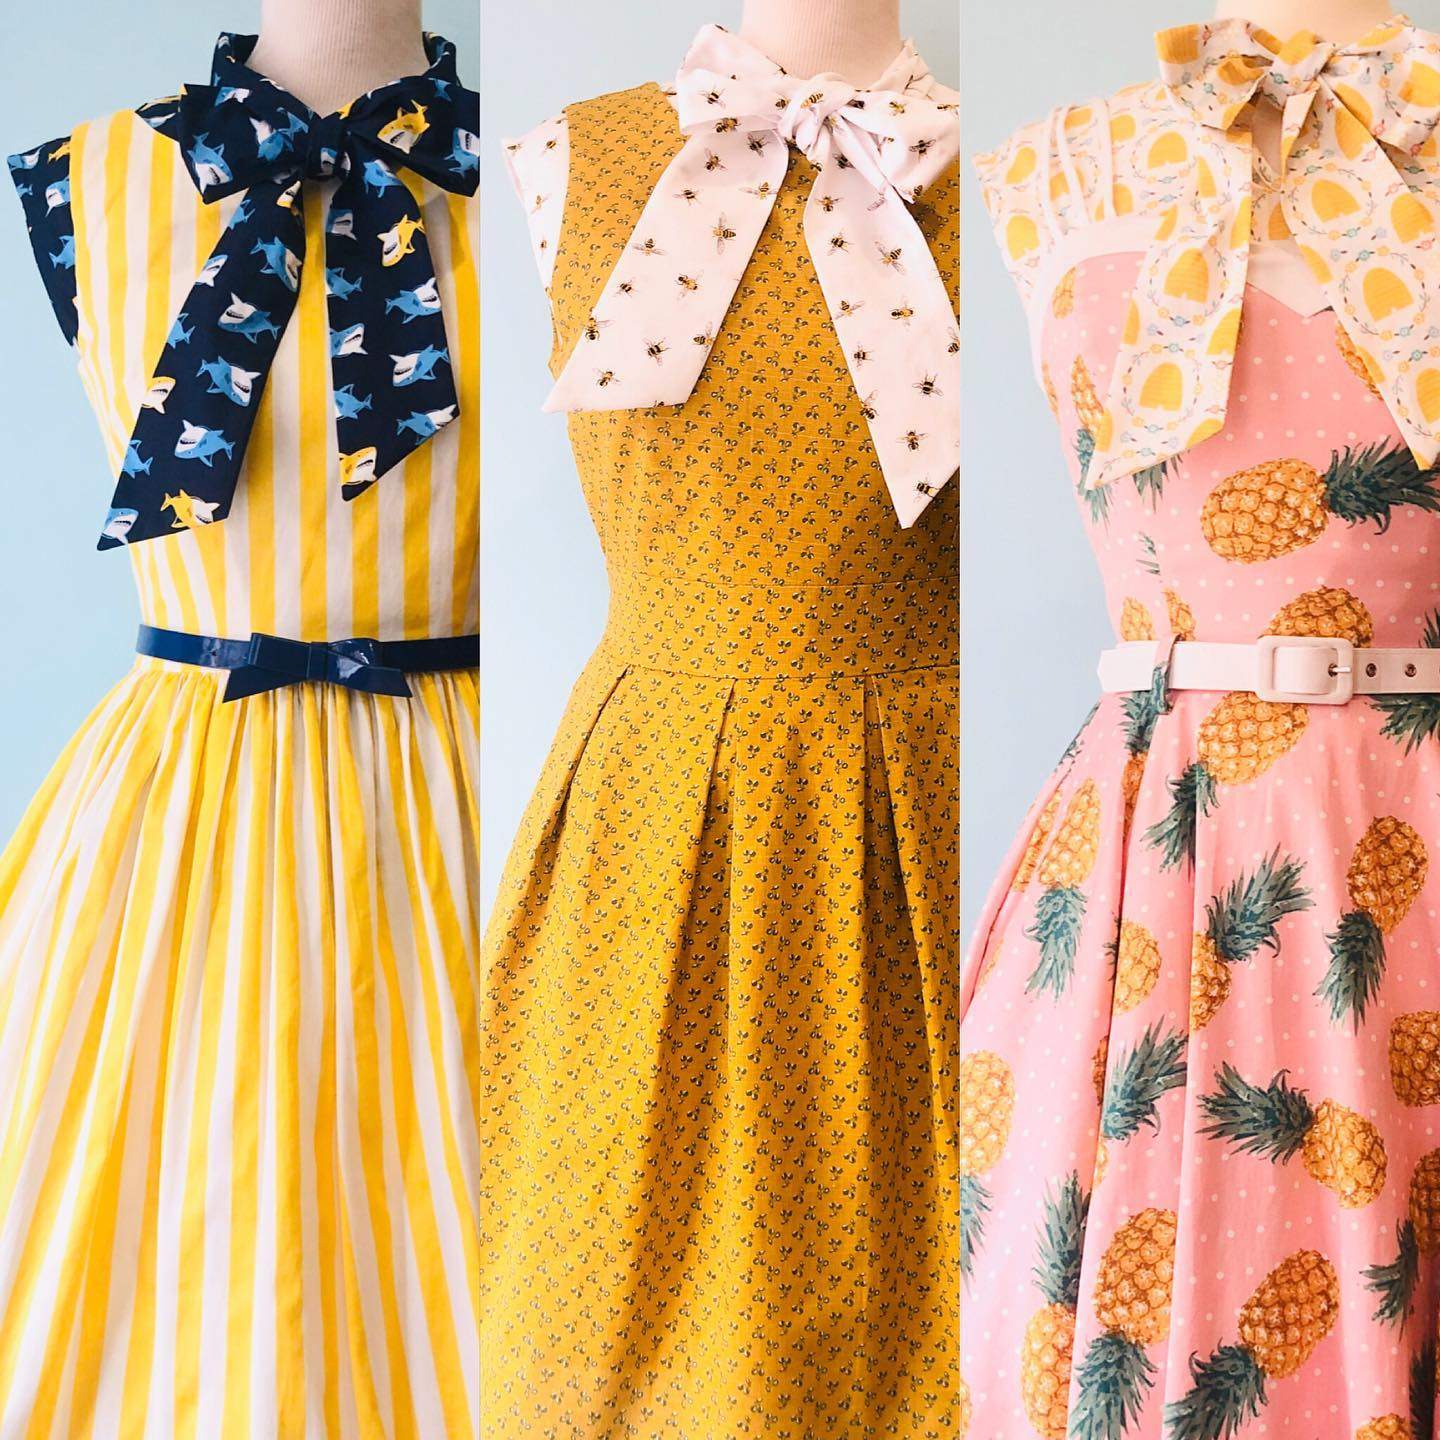 three dresses are shown with pineapples on them.